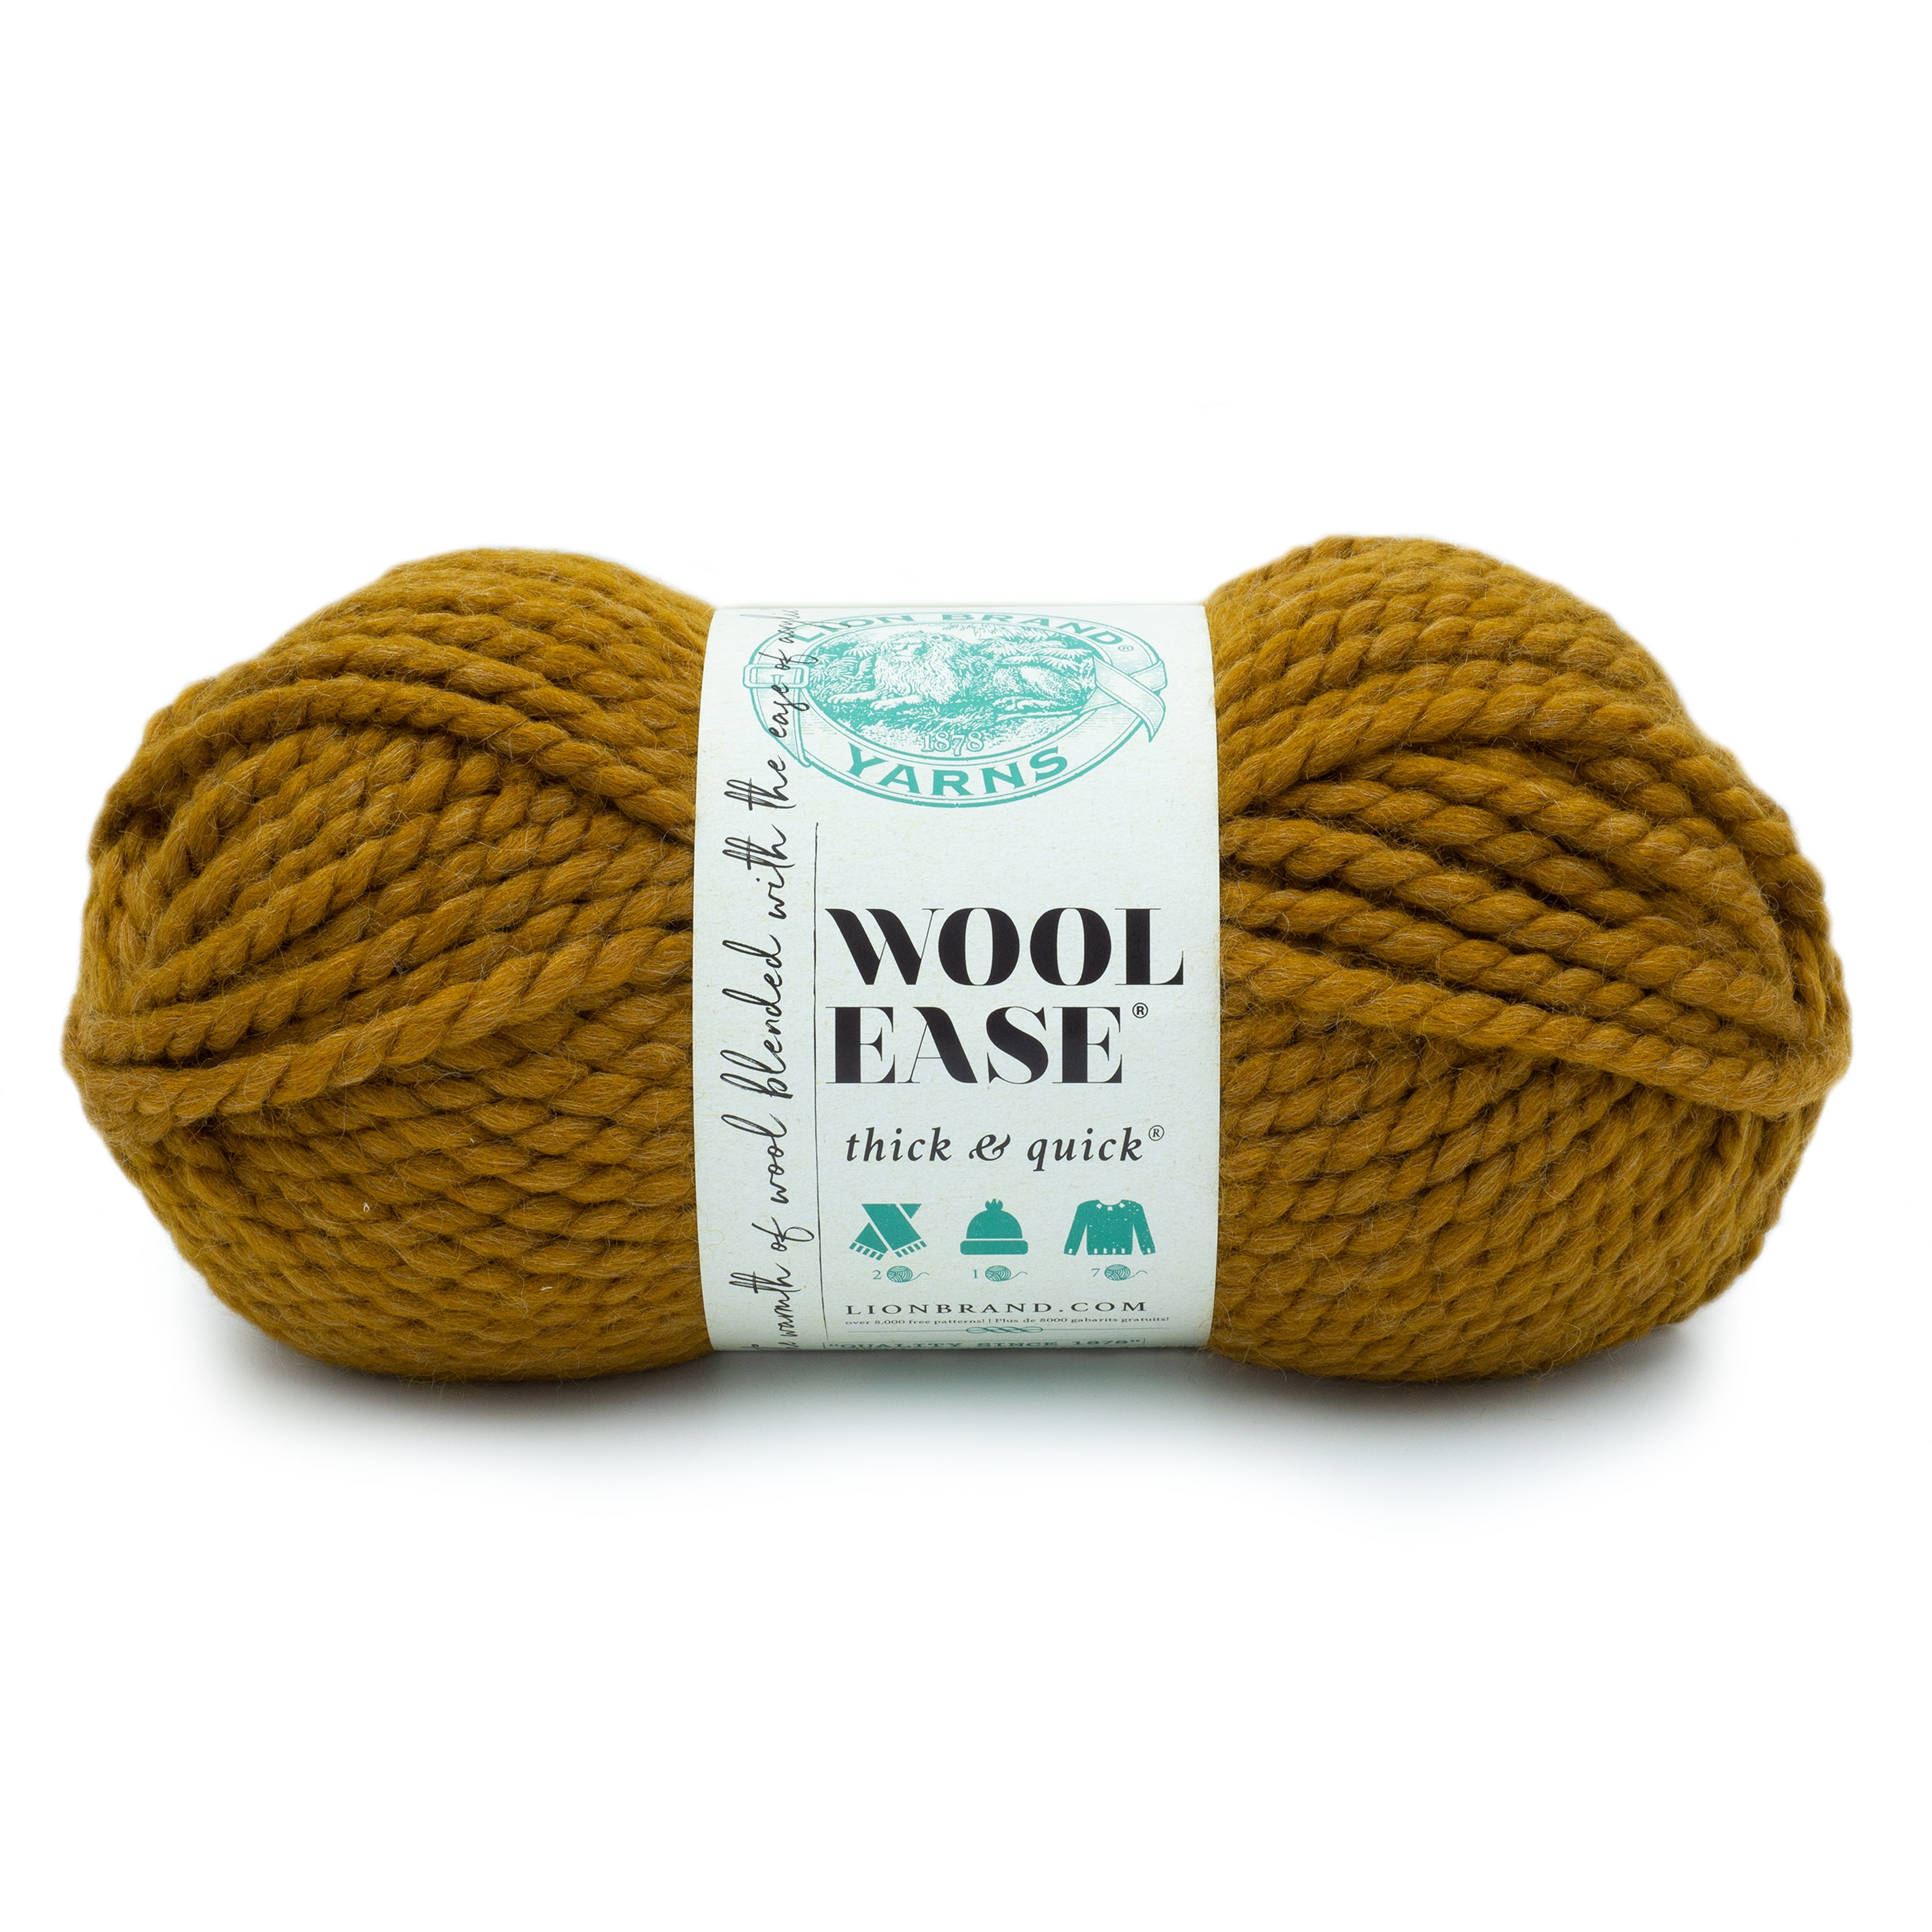 Lion Brand Yarn Wool-Ease Thick & Quick Flax Super Bulky Acrylic